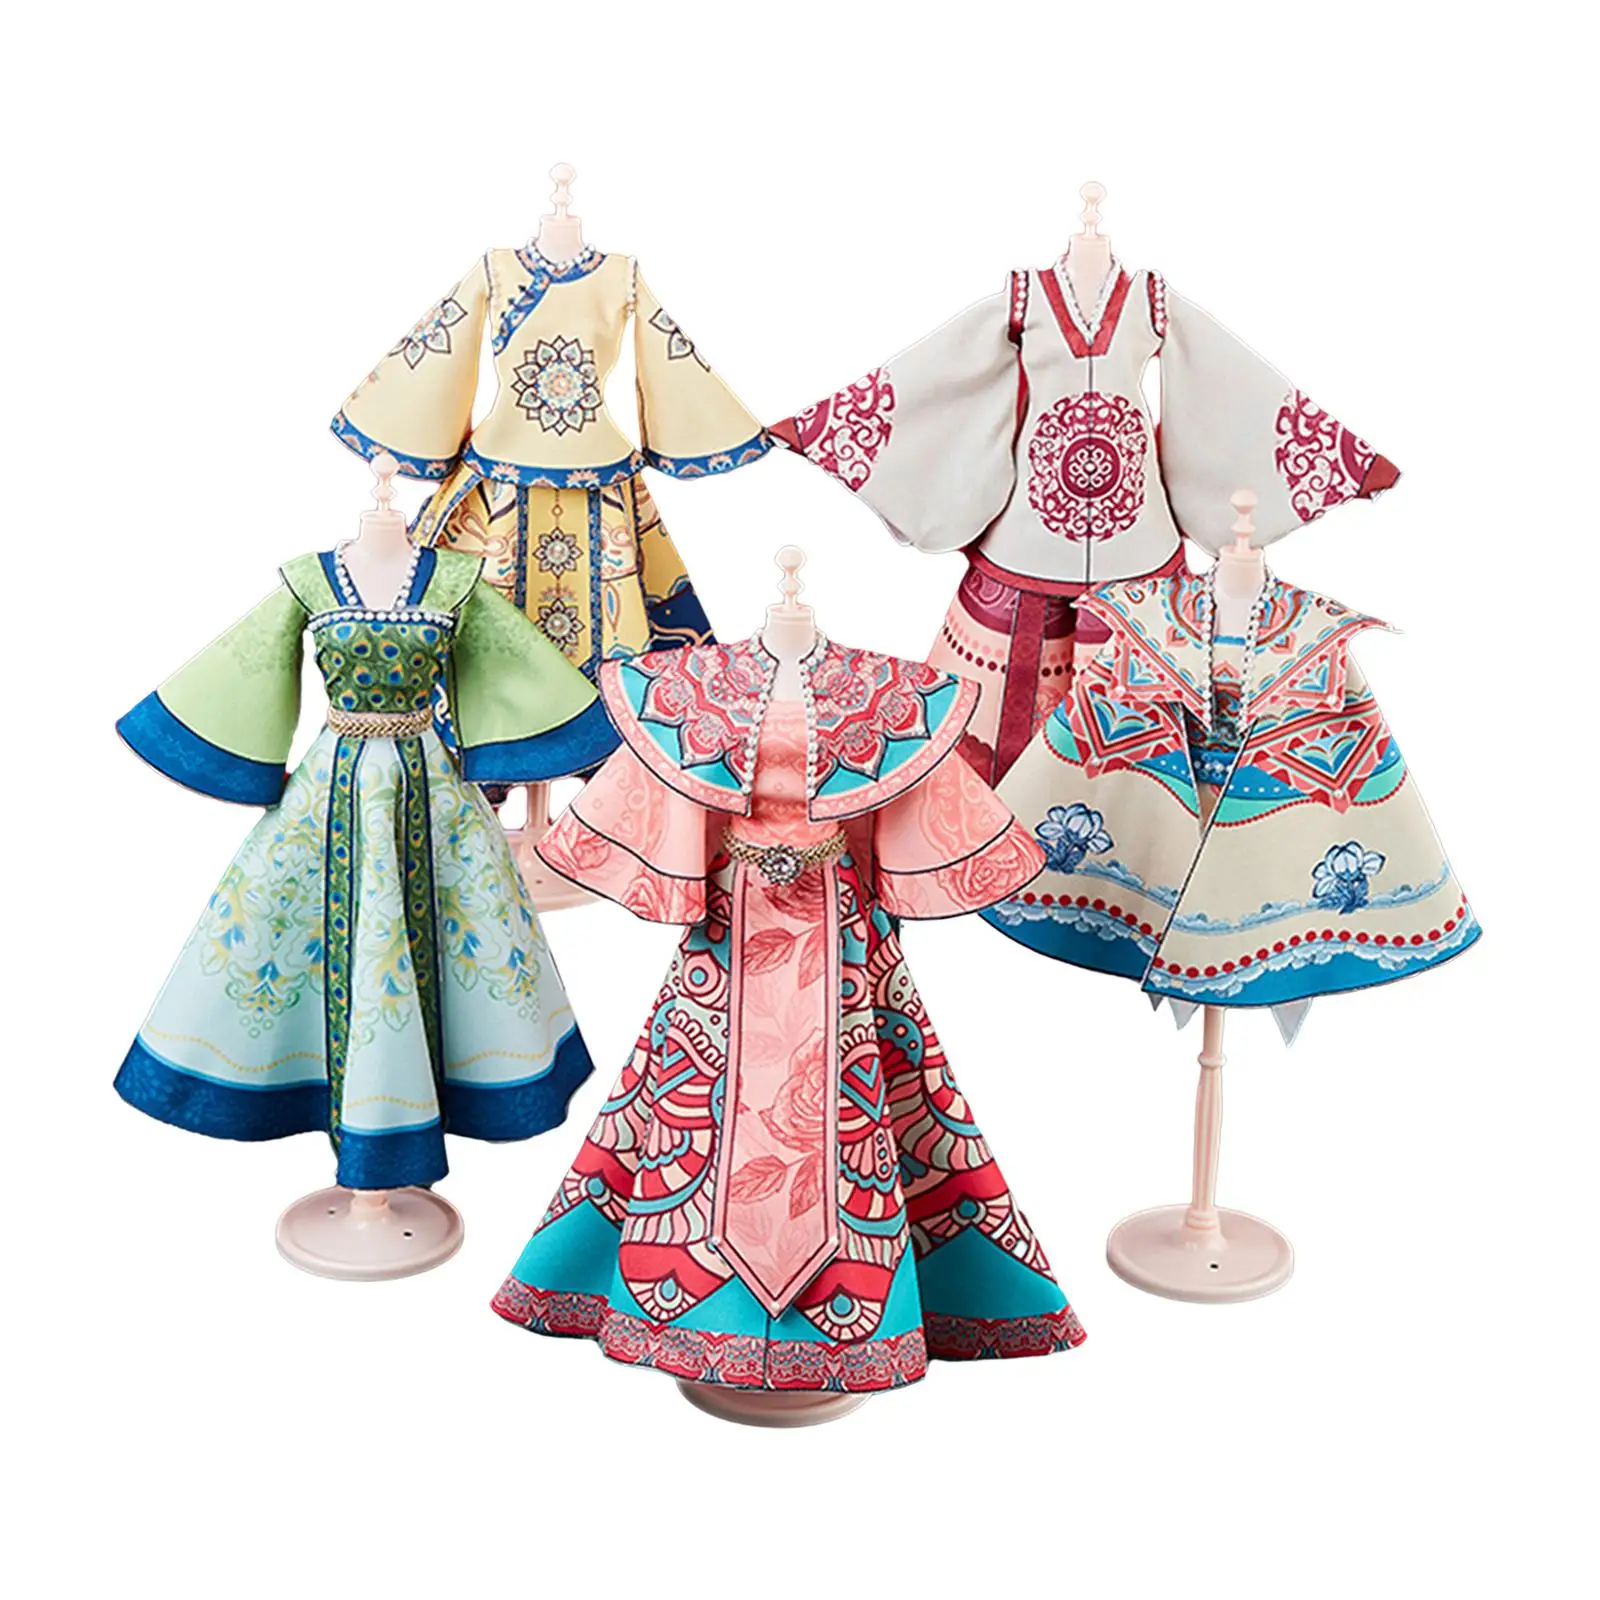 Fashion Designer Kits for Diy Activity Set Chinese Ancient Traditional Clothes Diy Clothes Making Kits for Gifts